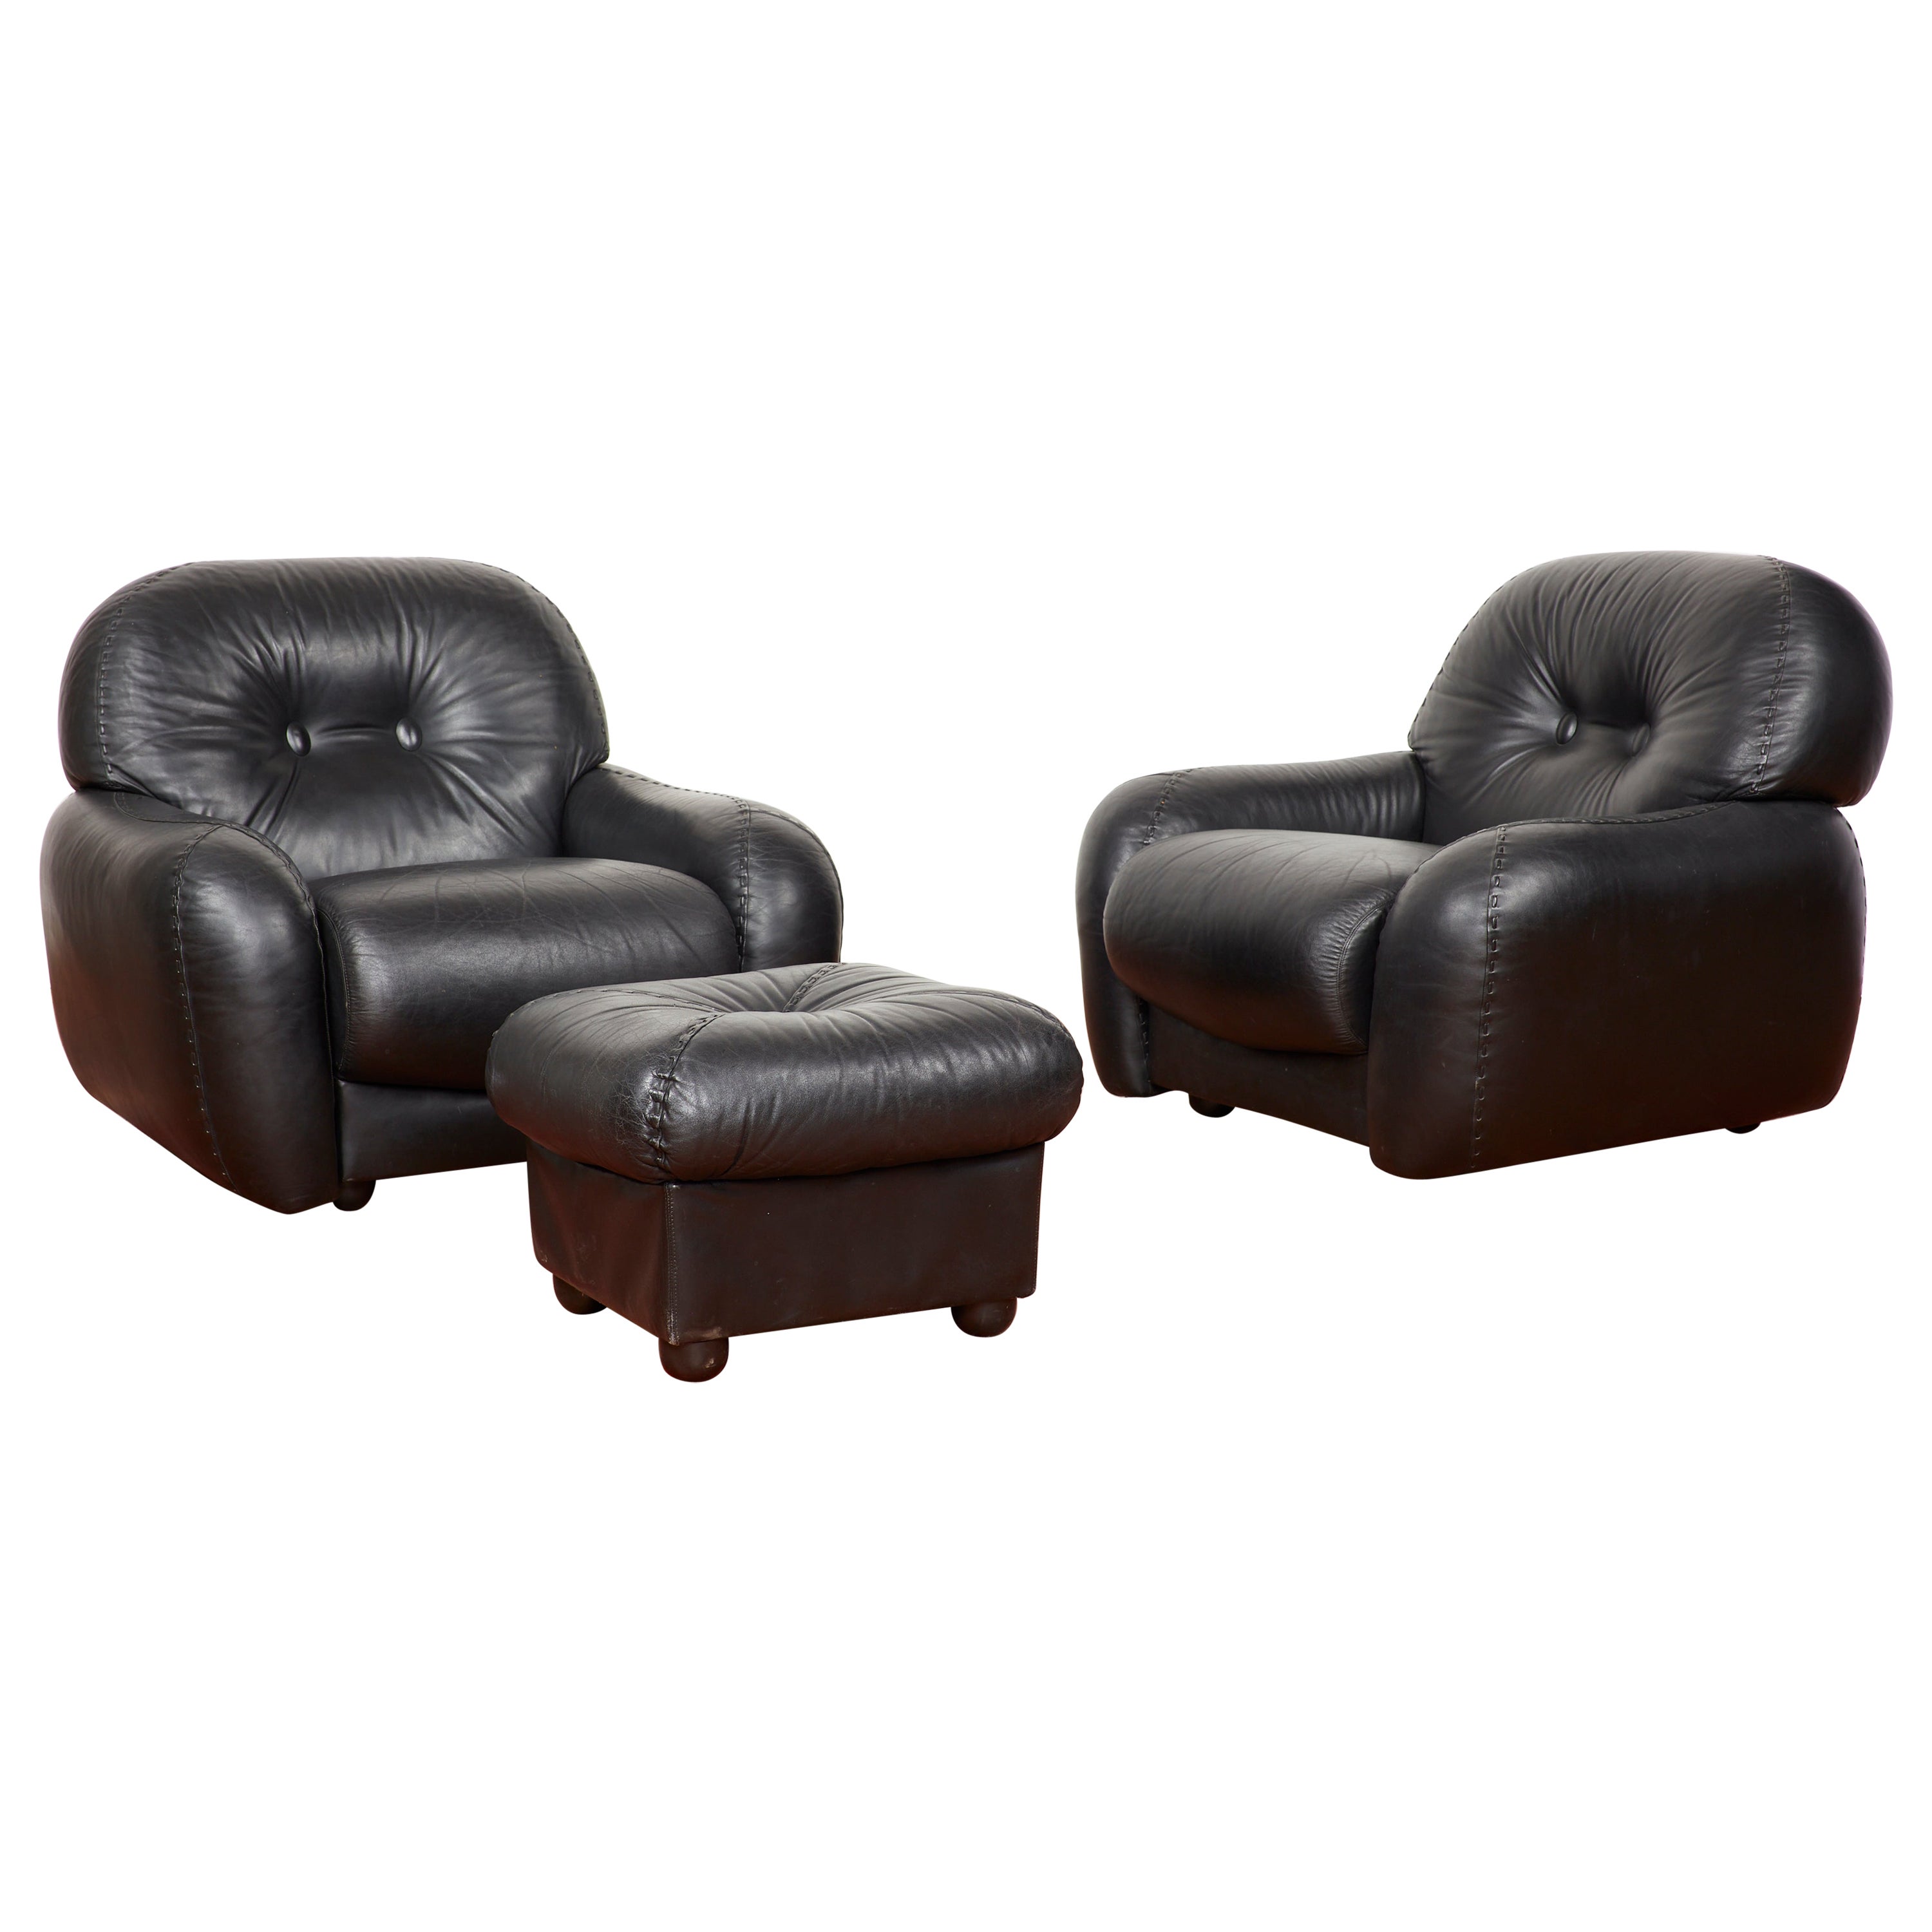 Adriano Piazzesi Armchairs and Ottoman For Sale